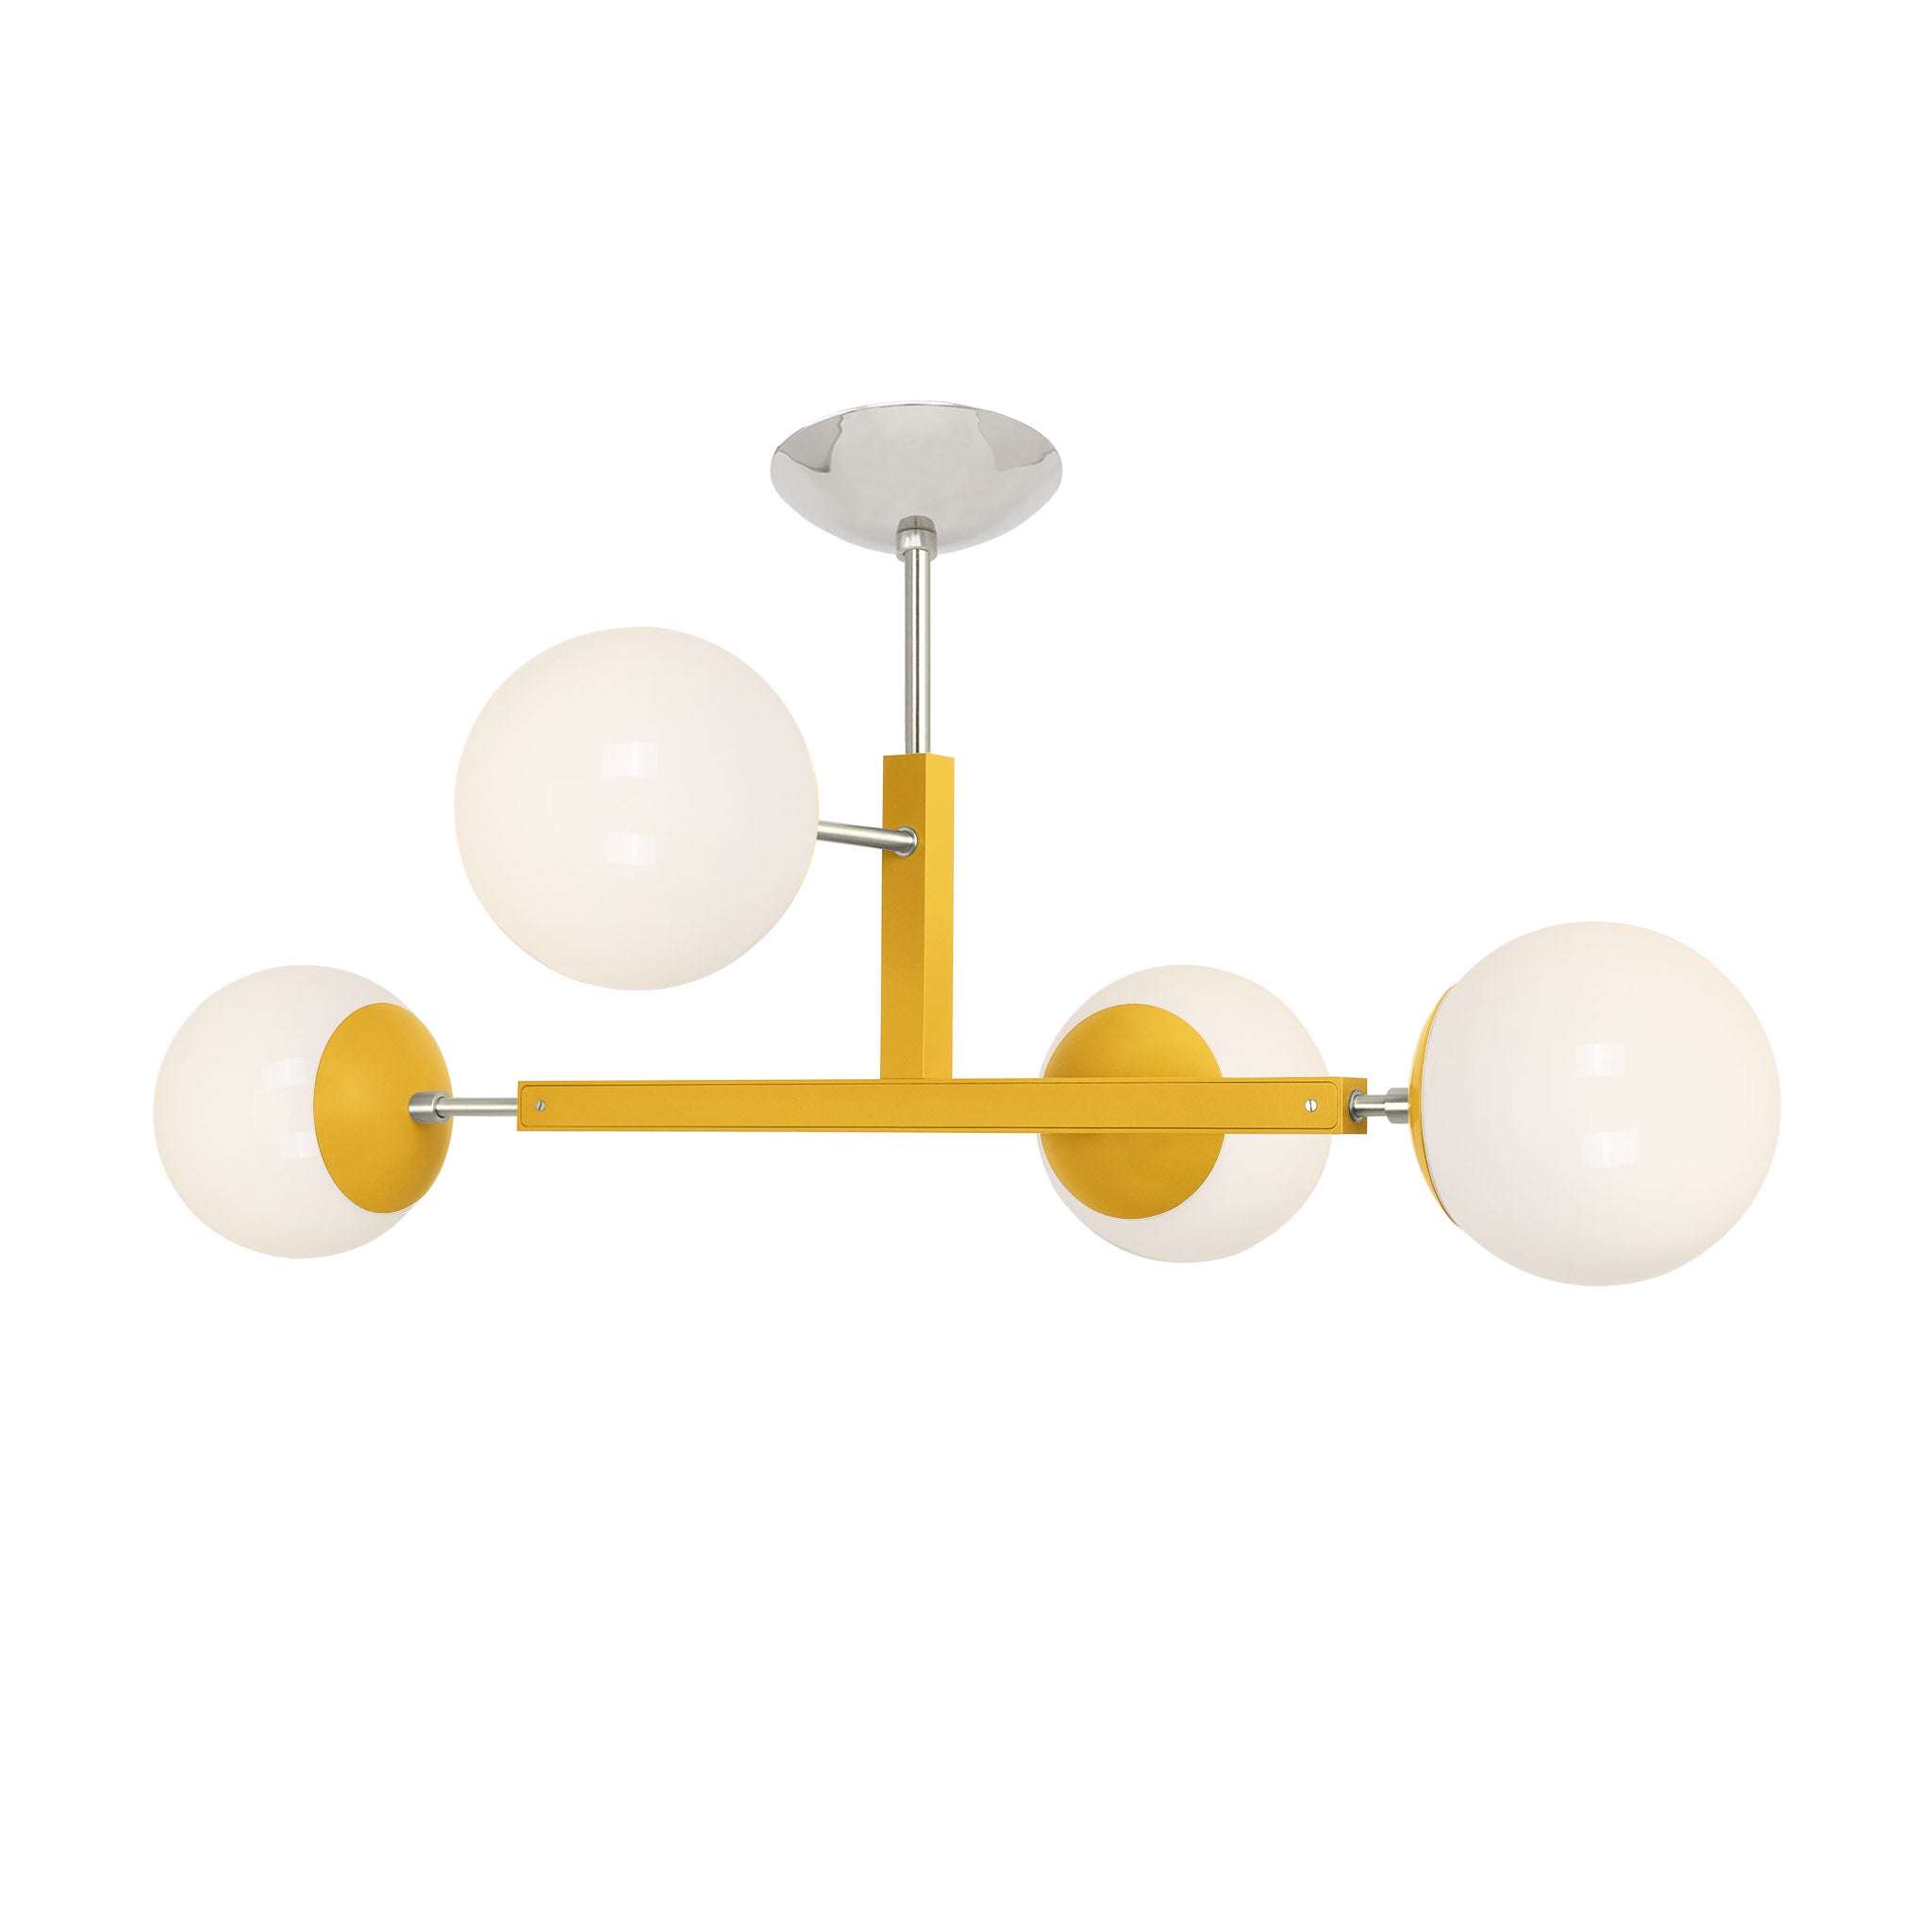 Nickel and ochre color Status flush mount Dutton Brown lighting